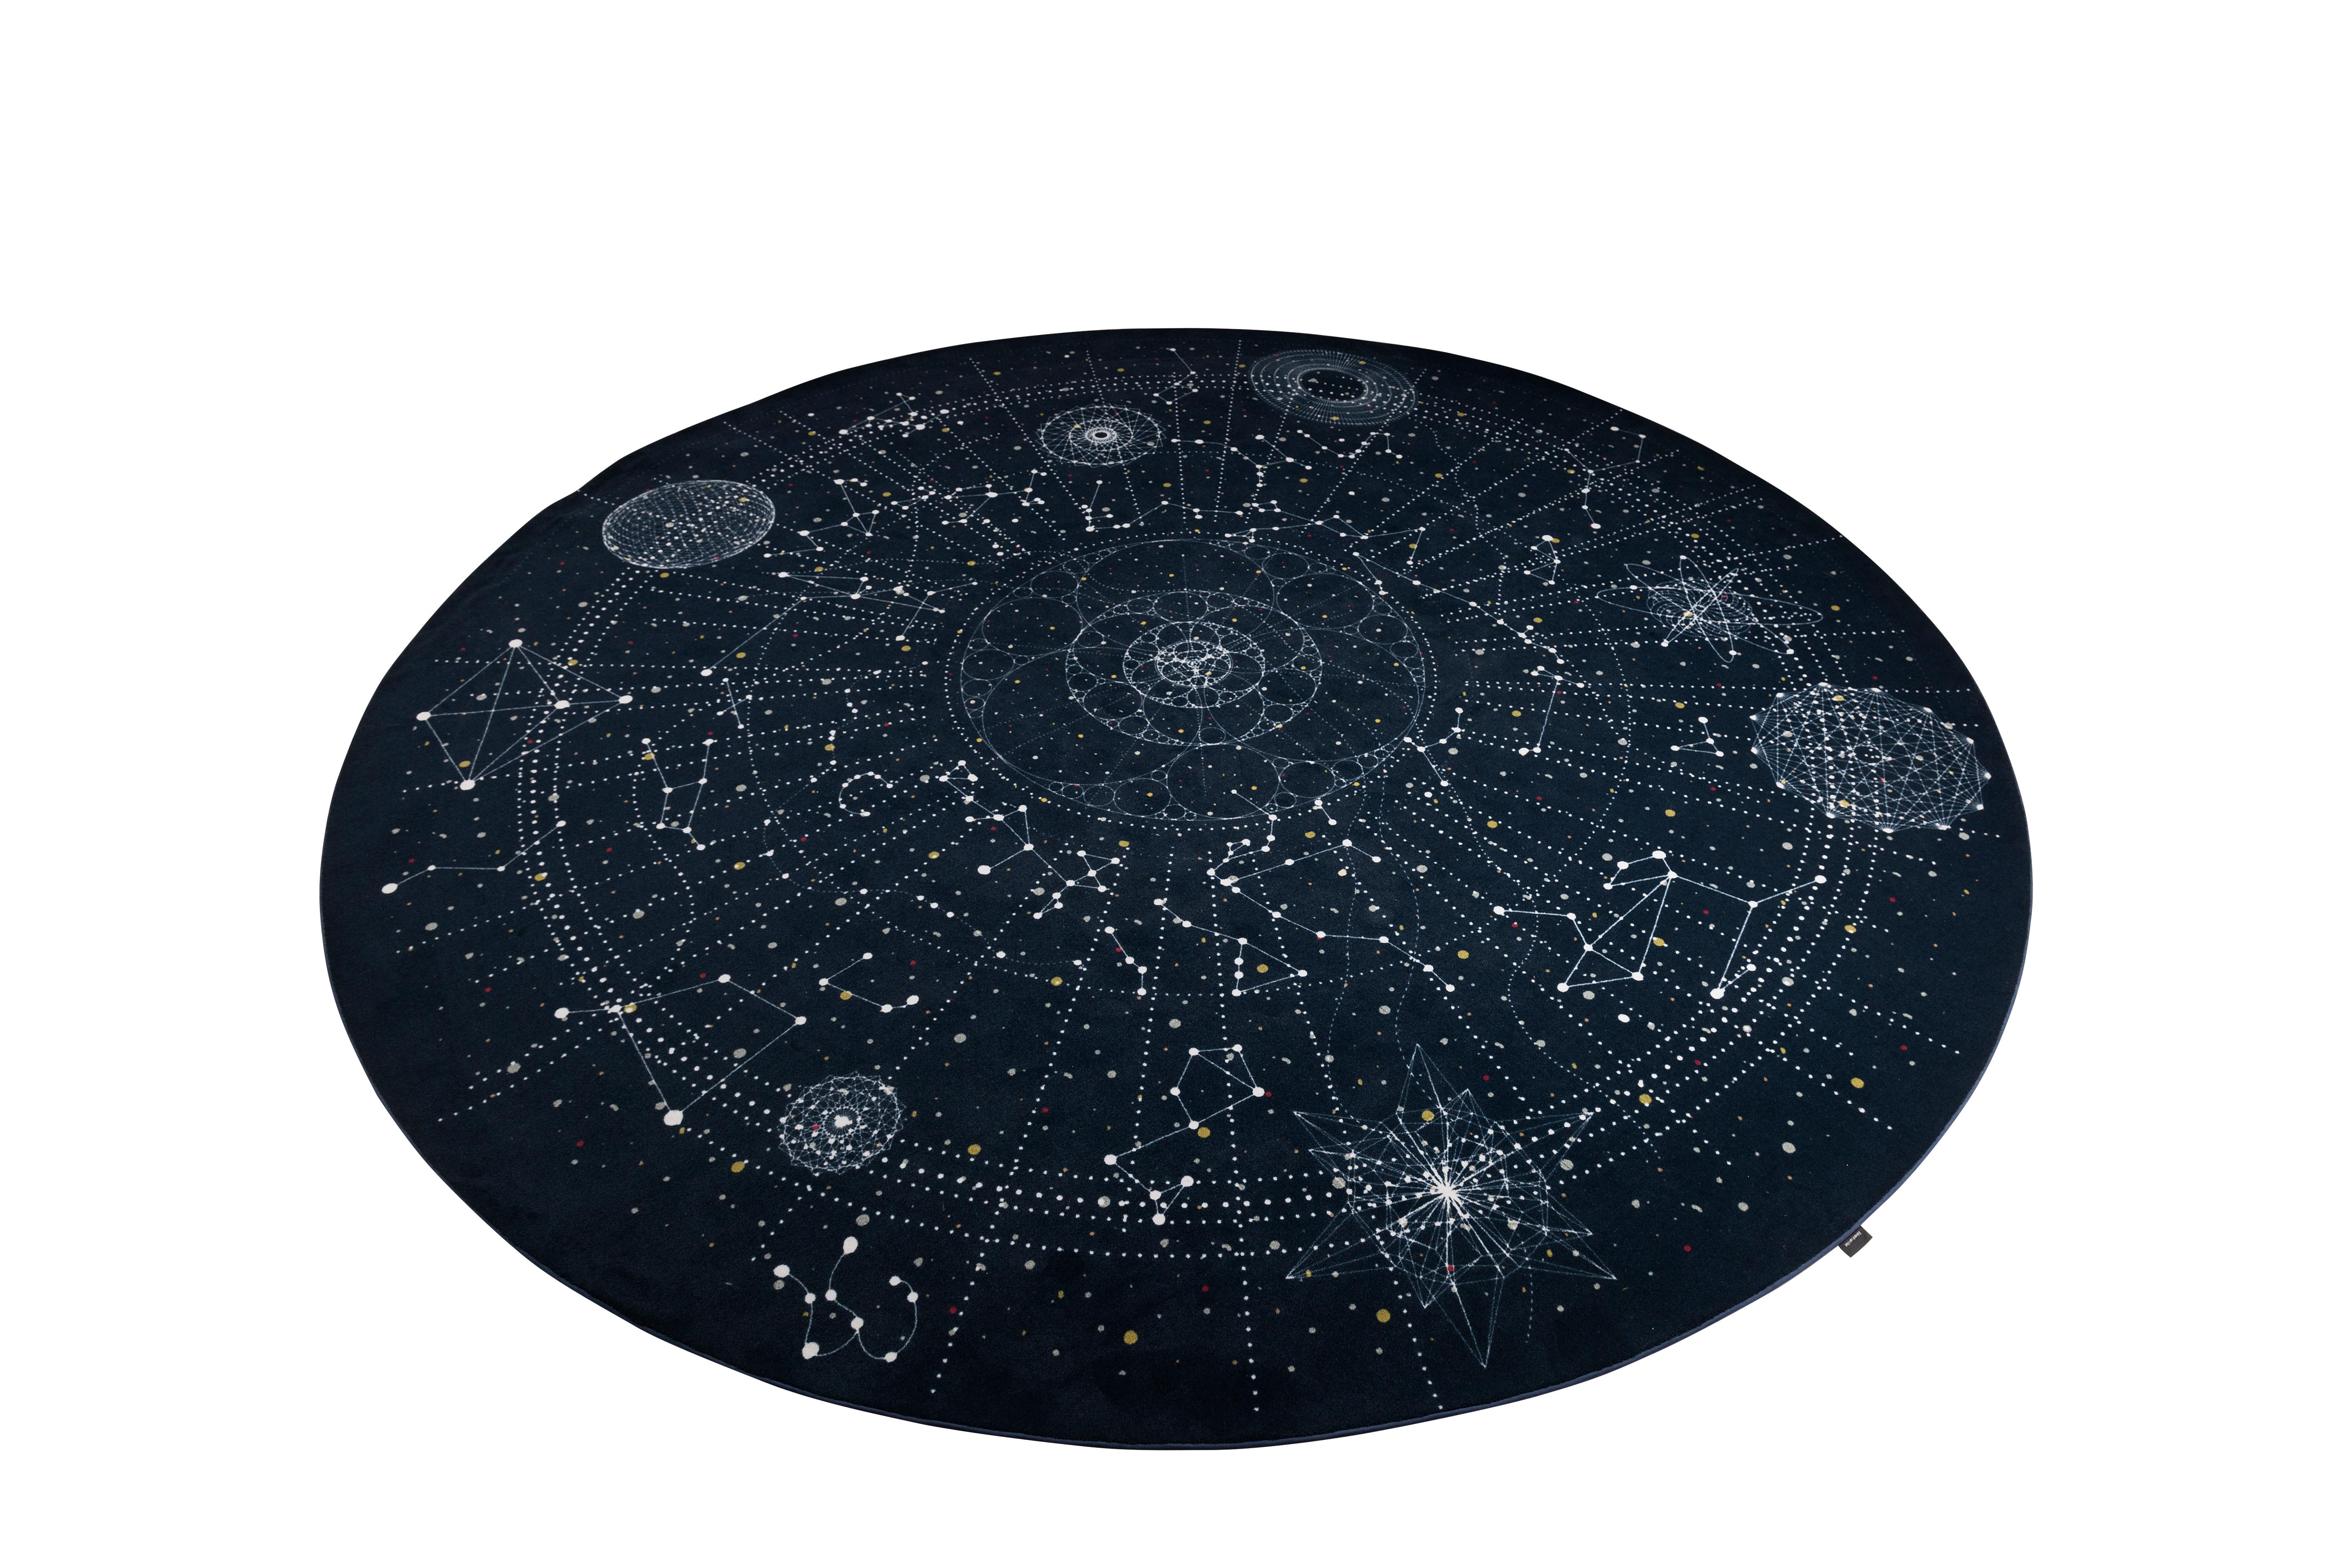 Moooi Large Celestial rug in Wool by Edward van Vliet

After his graduation from the Design Academy Eindhoven in 1989 – Edward belongs to the famous generation of Dutch designers who have been causing international sensation for many years now -